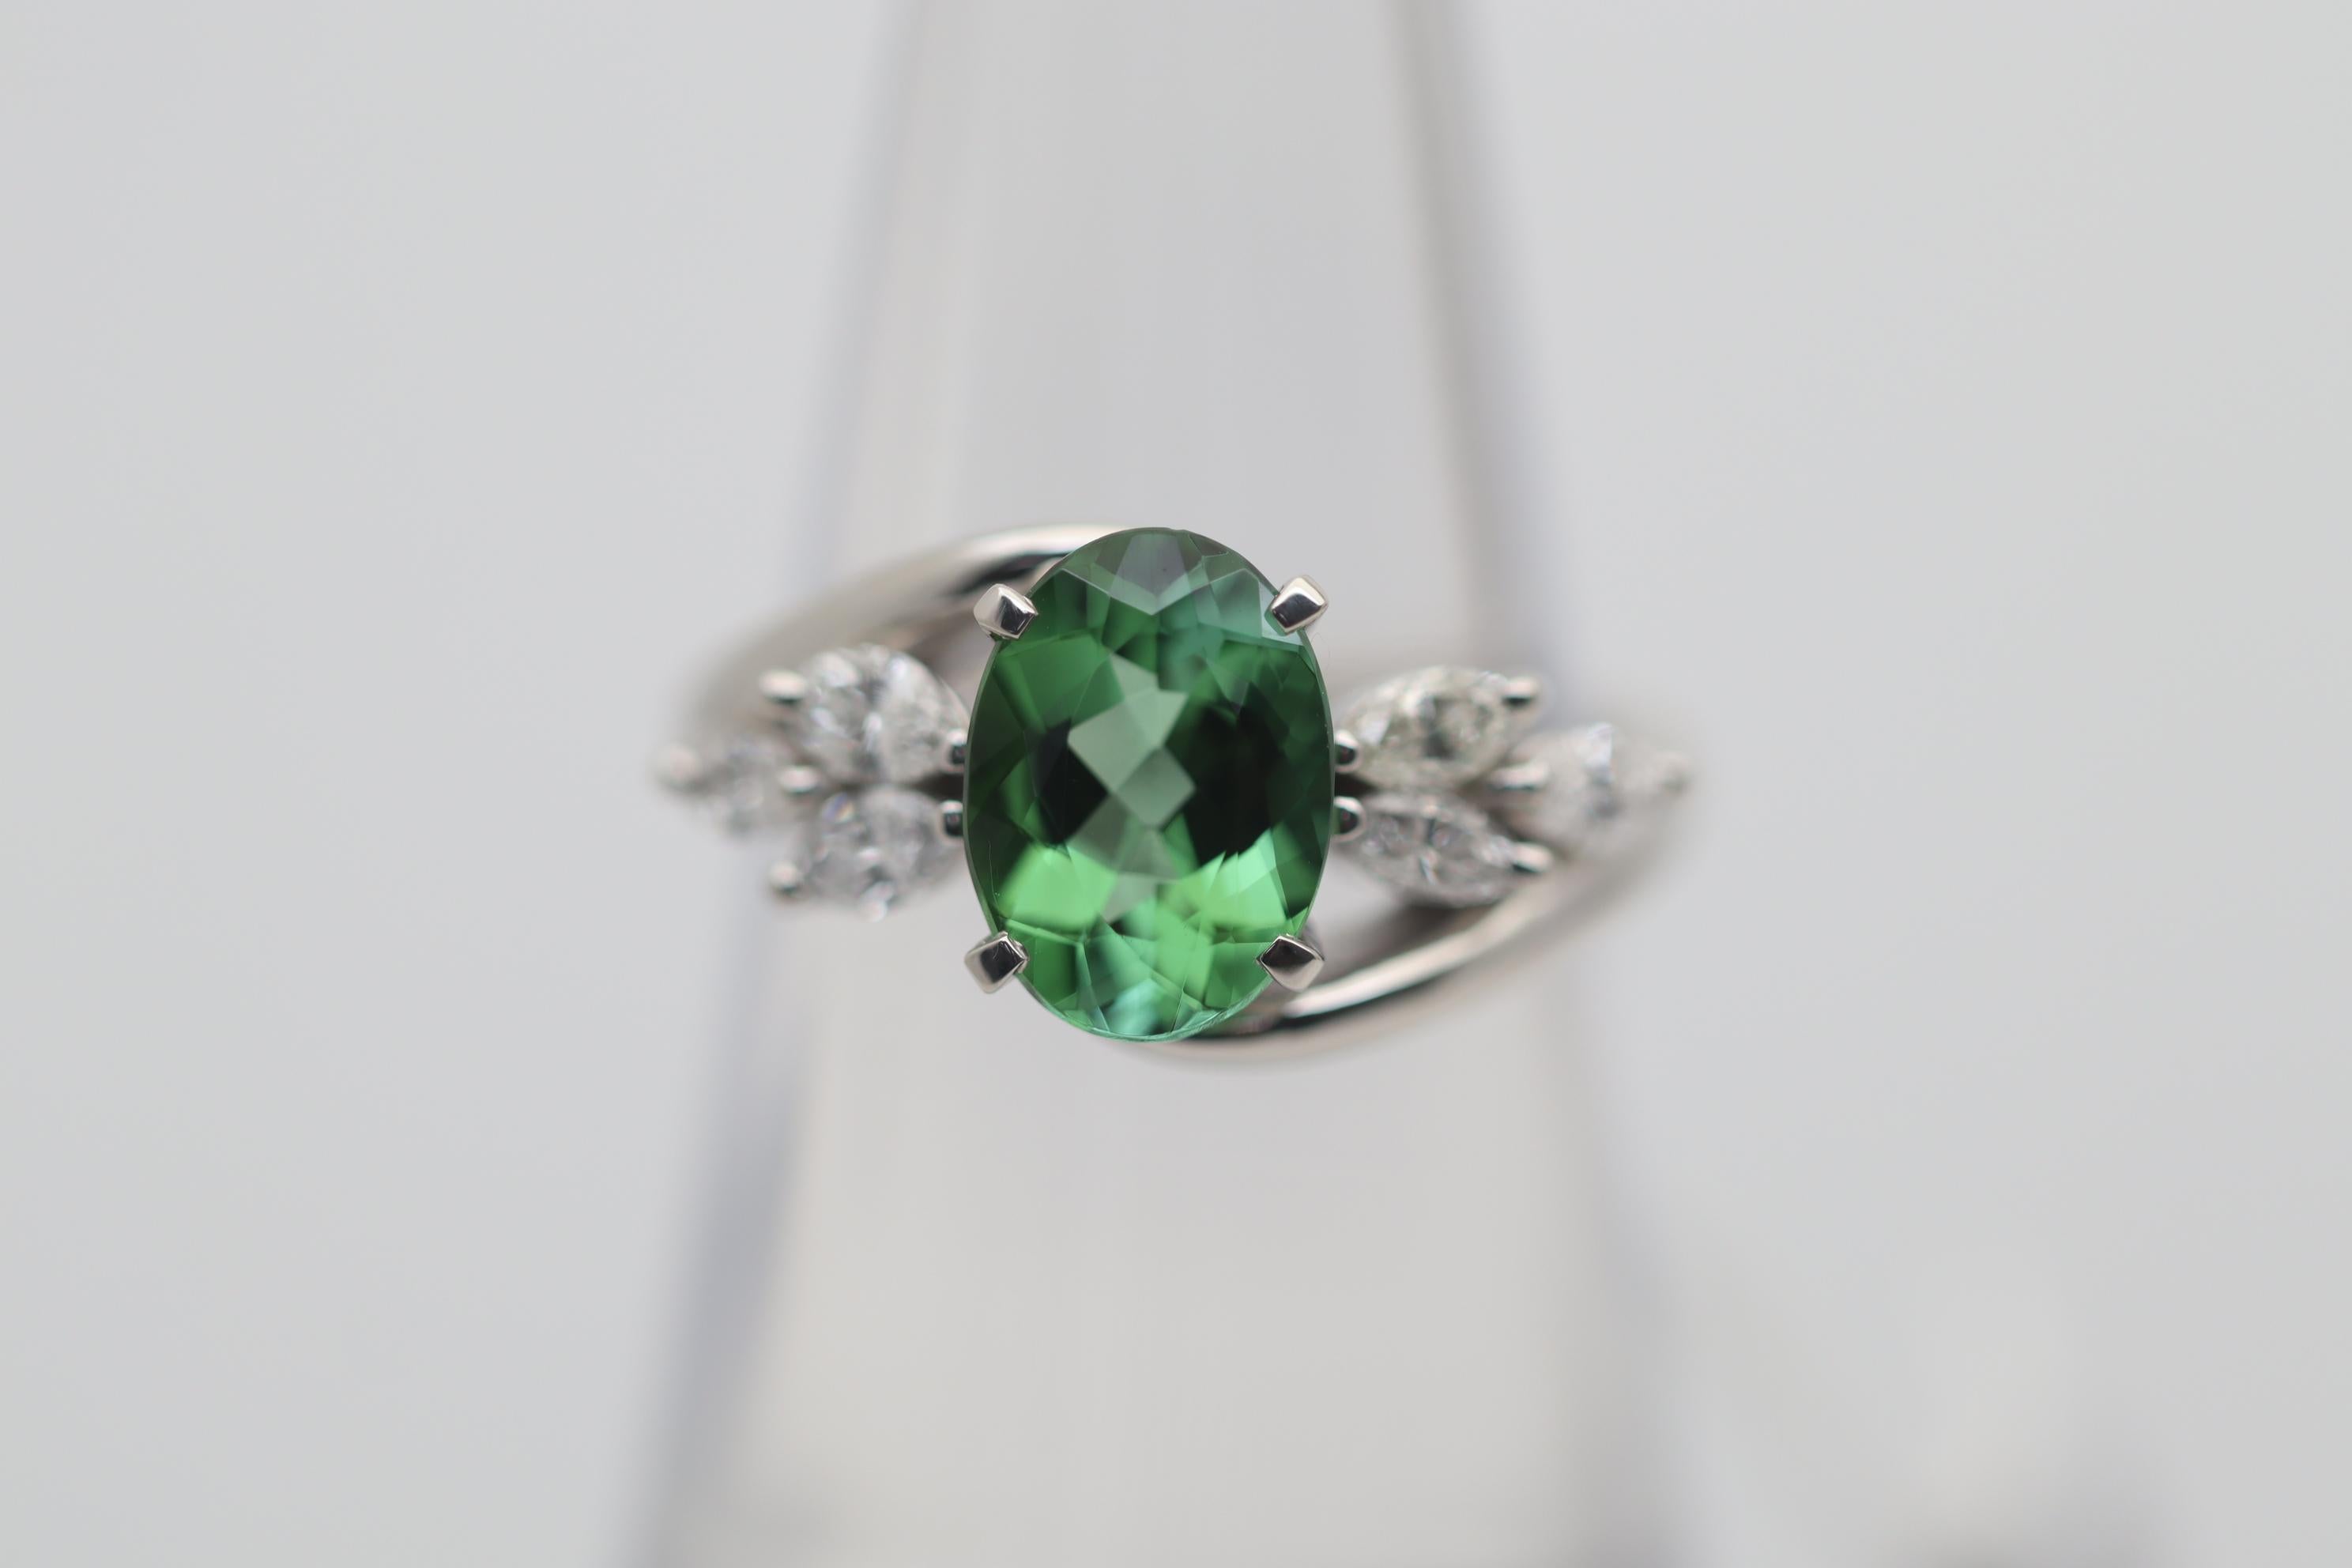 A beautiful vibrant green tourmaline which is just so fine, takes center stage of this platinum ring. The tourmaline weighs 1.76 carats and has a slightly bluish-green color which is bright, vibrant, and will make you smile. It is complemented by 6